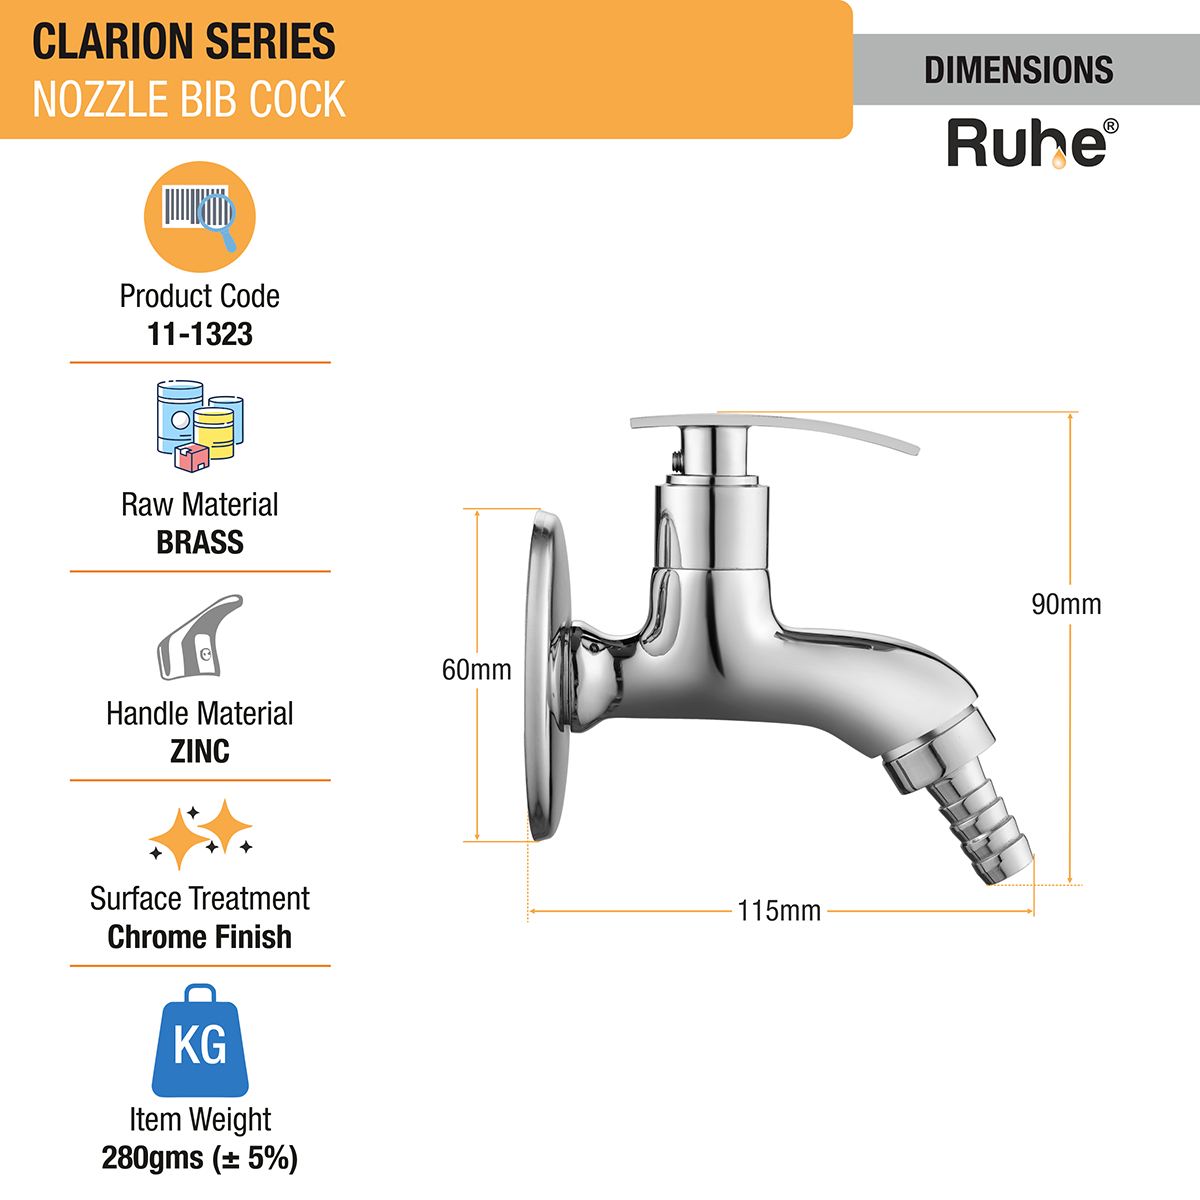 Clarion Nozzle Bib Tap Brass Faucet dimensions and size